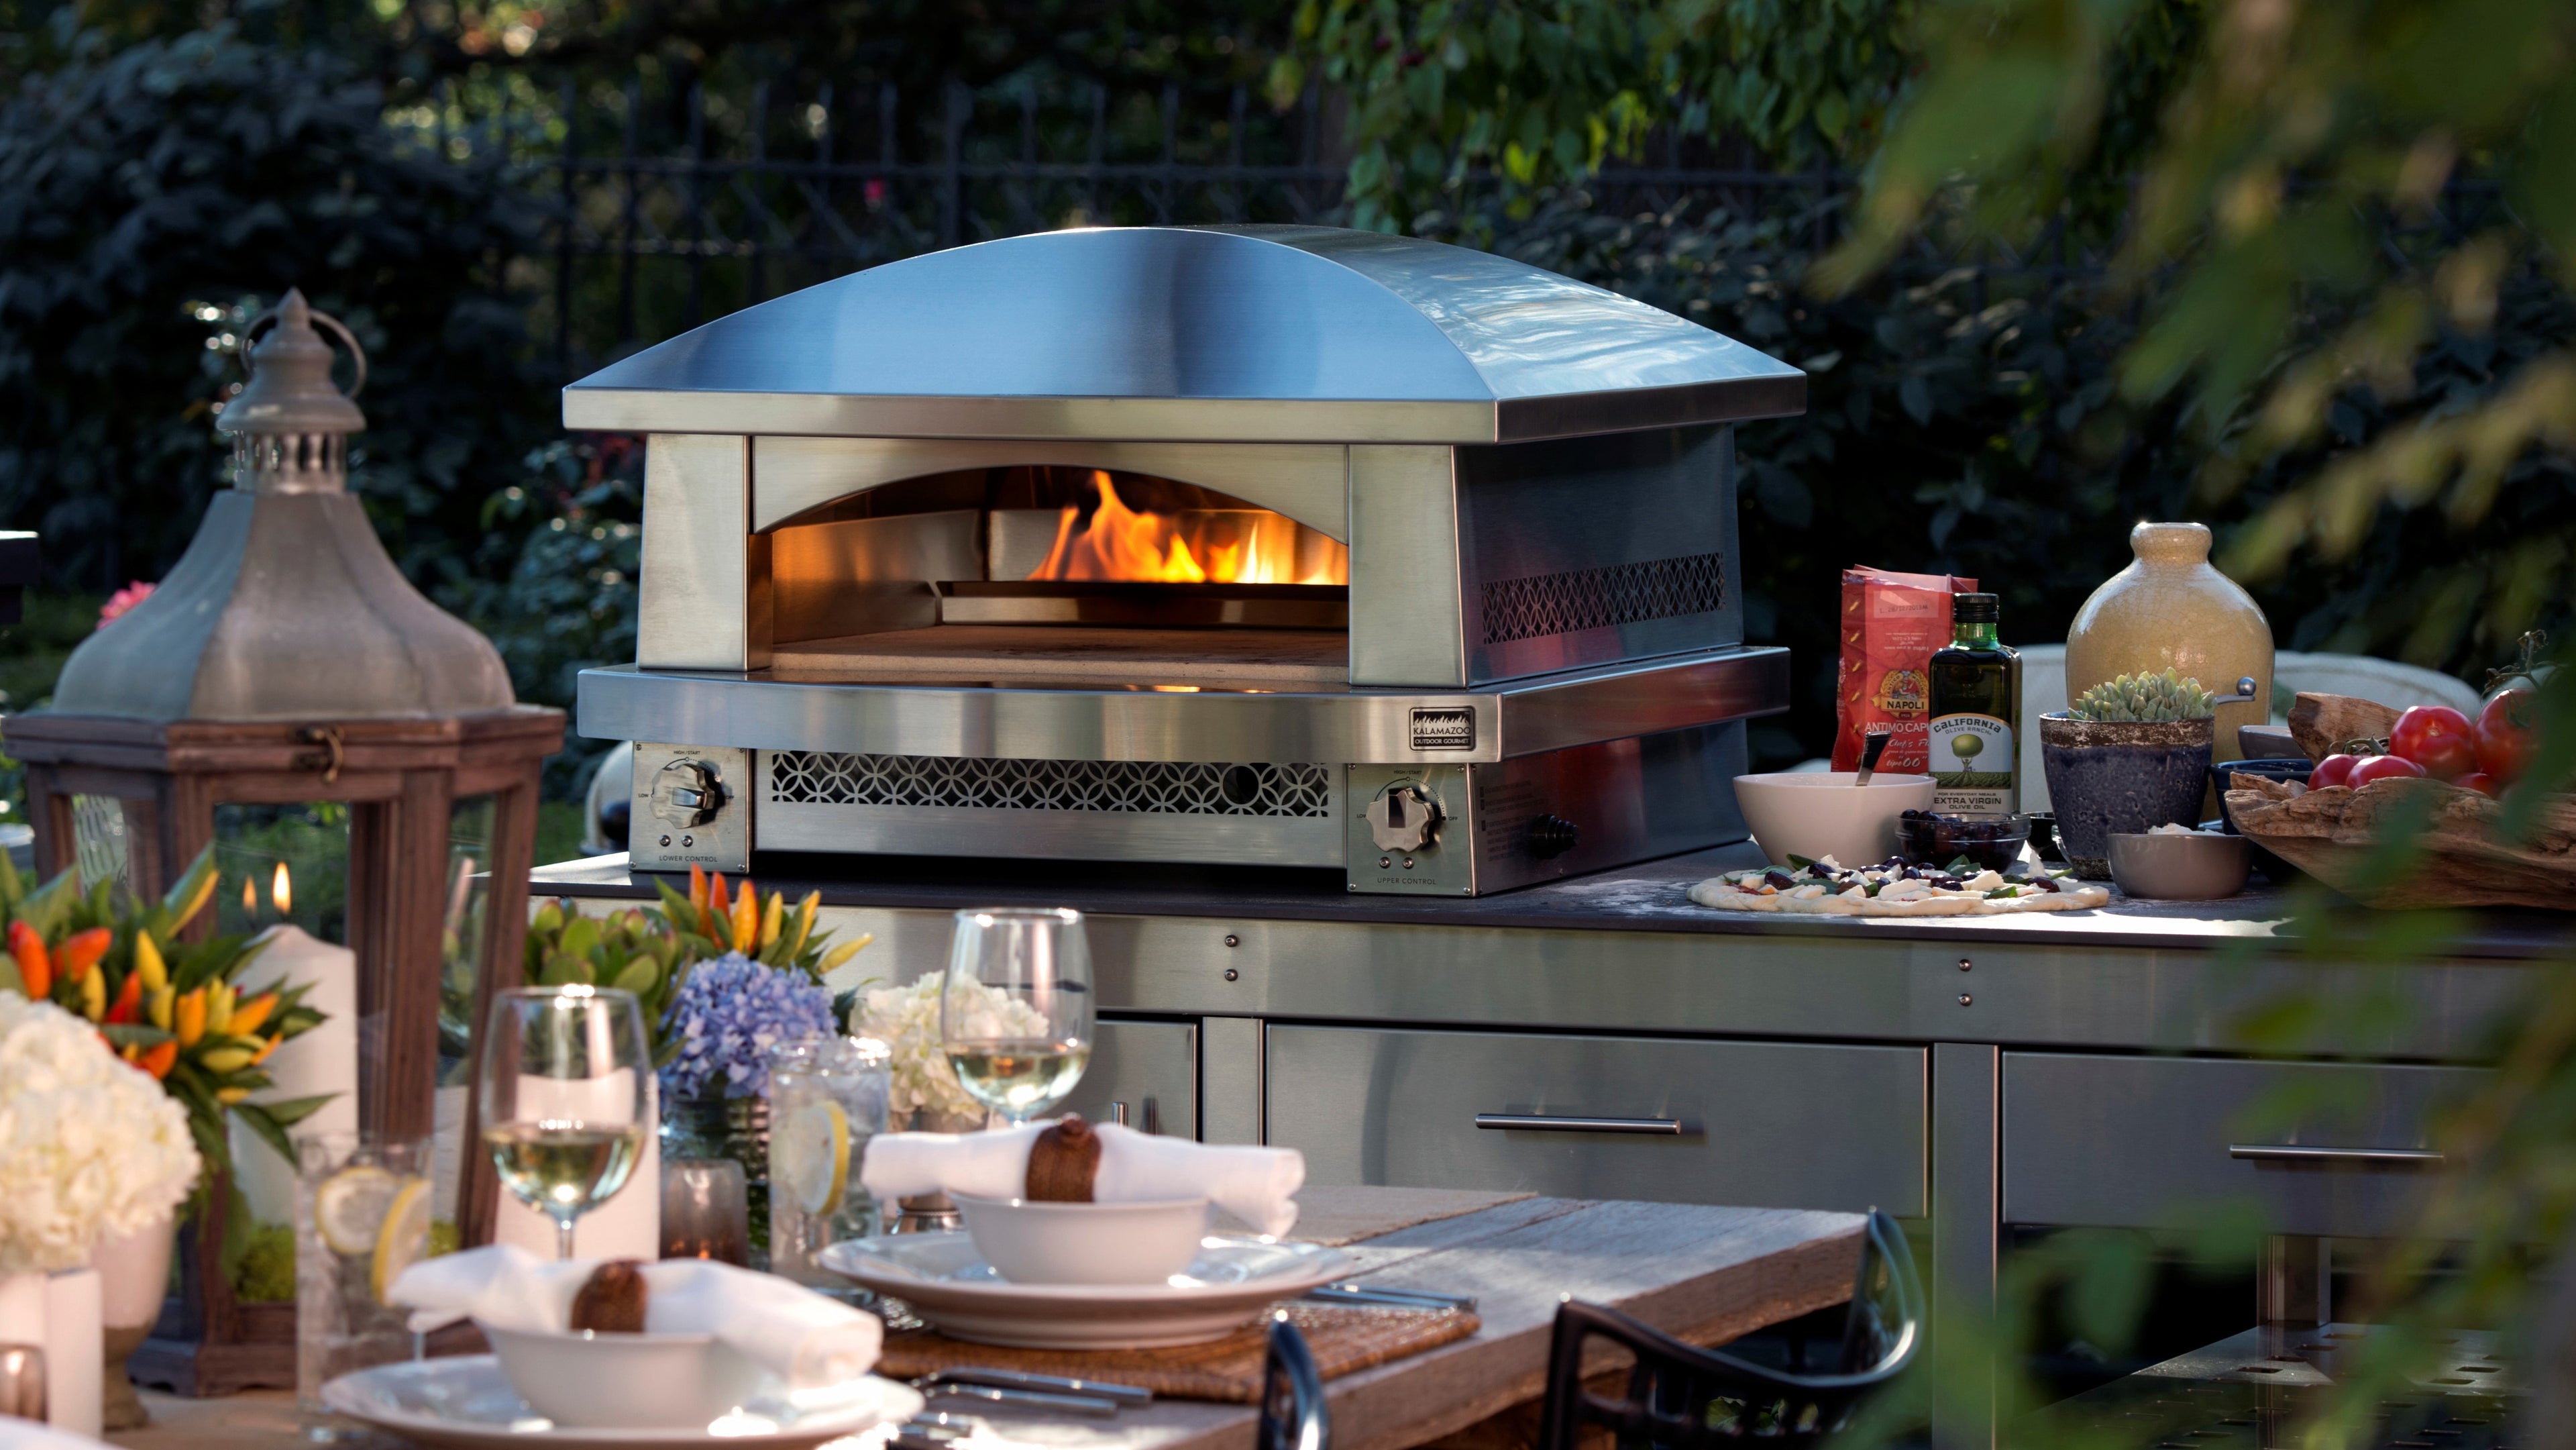 Outdoor Pizza Ovens from luxury brands including Kalamazoo, Alfa and Delivita